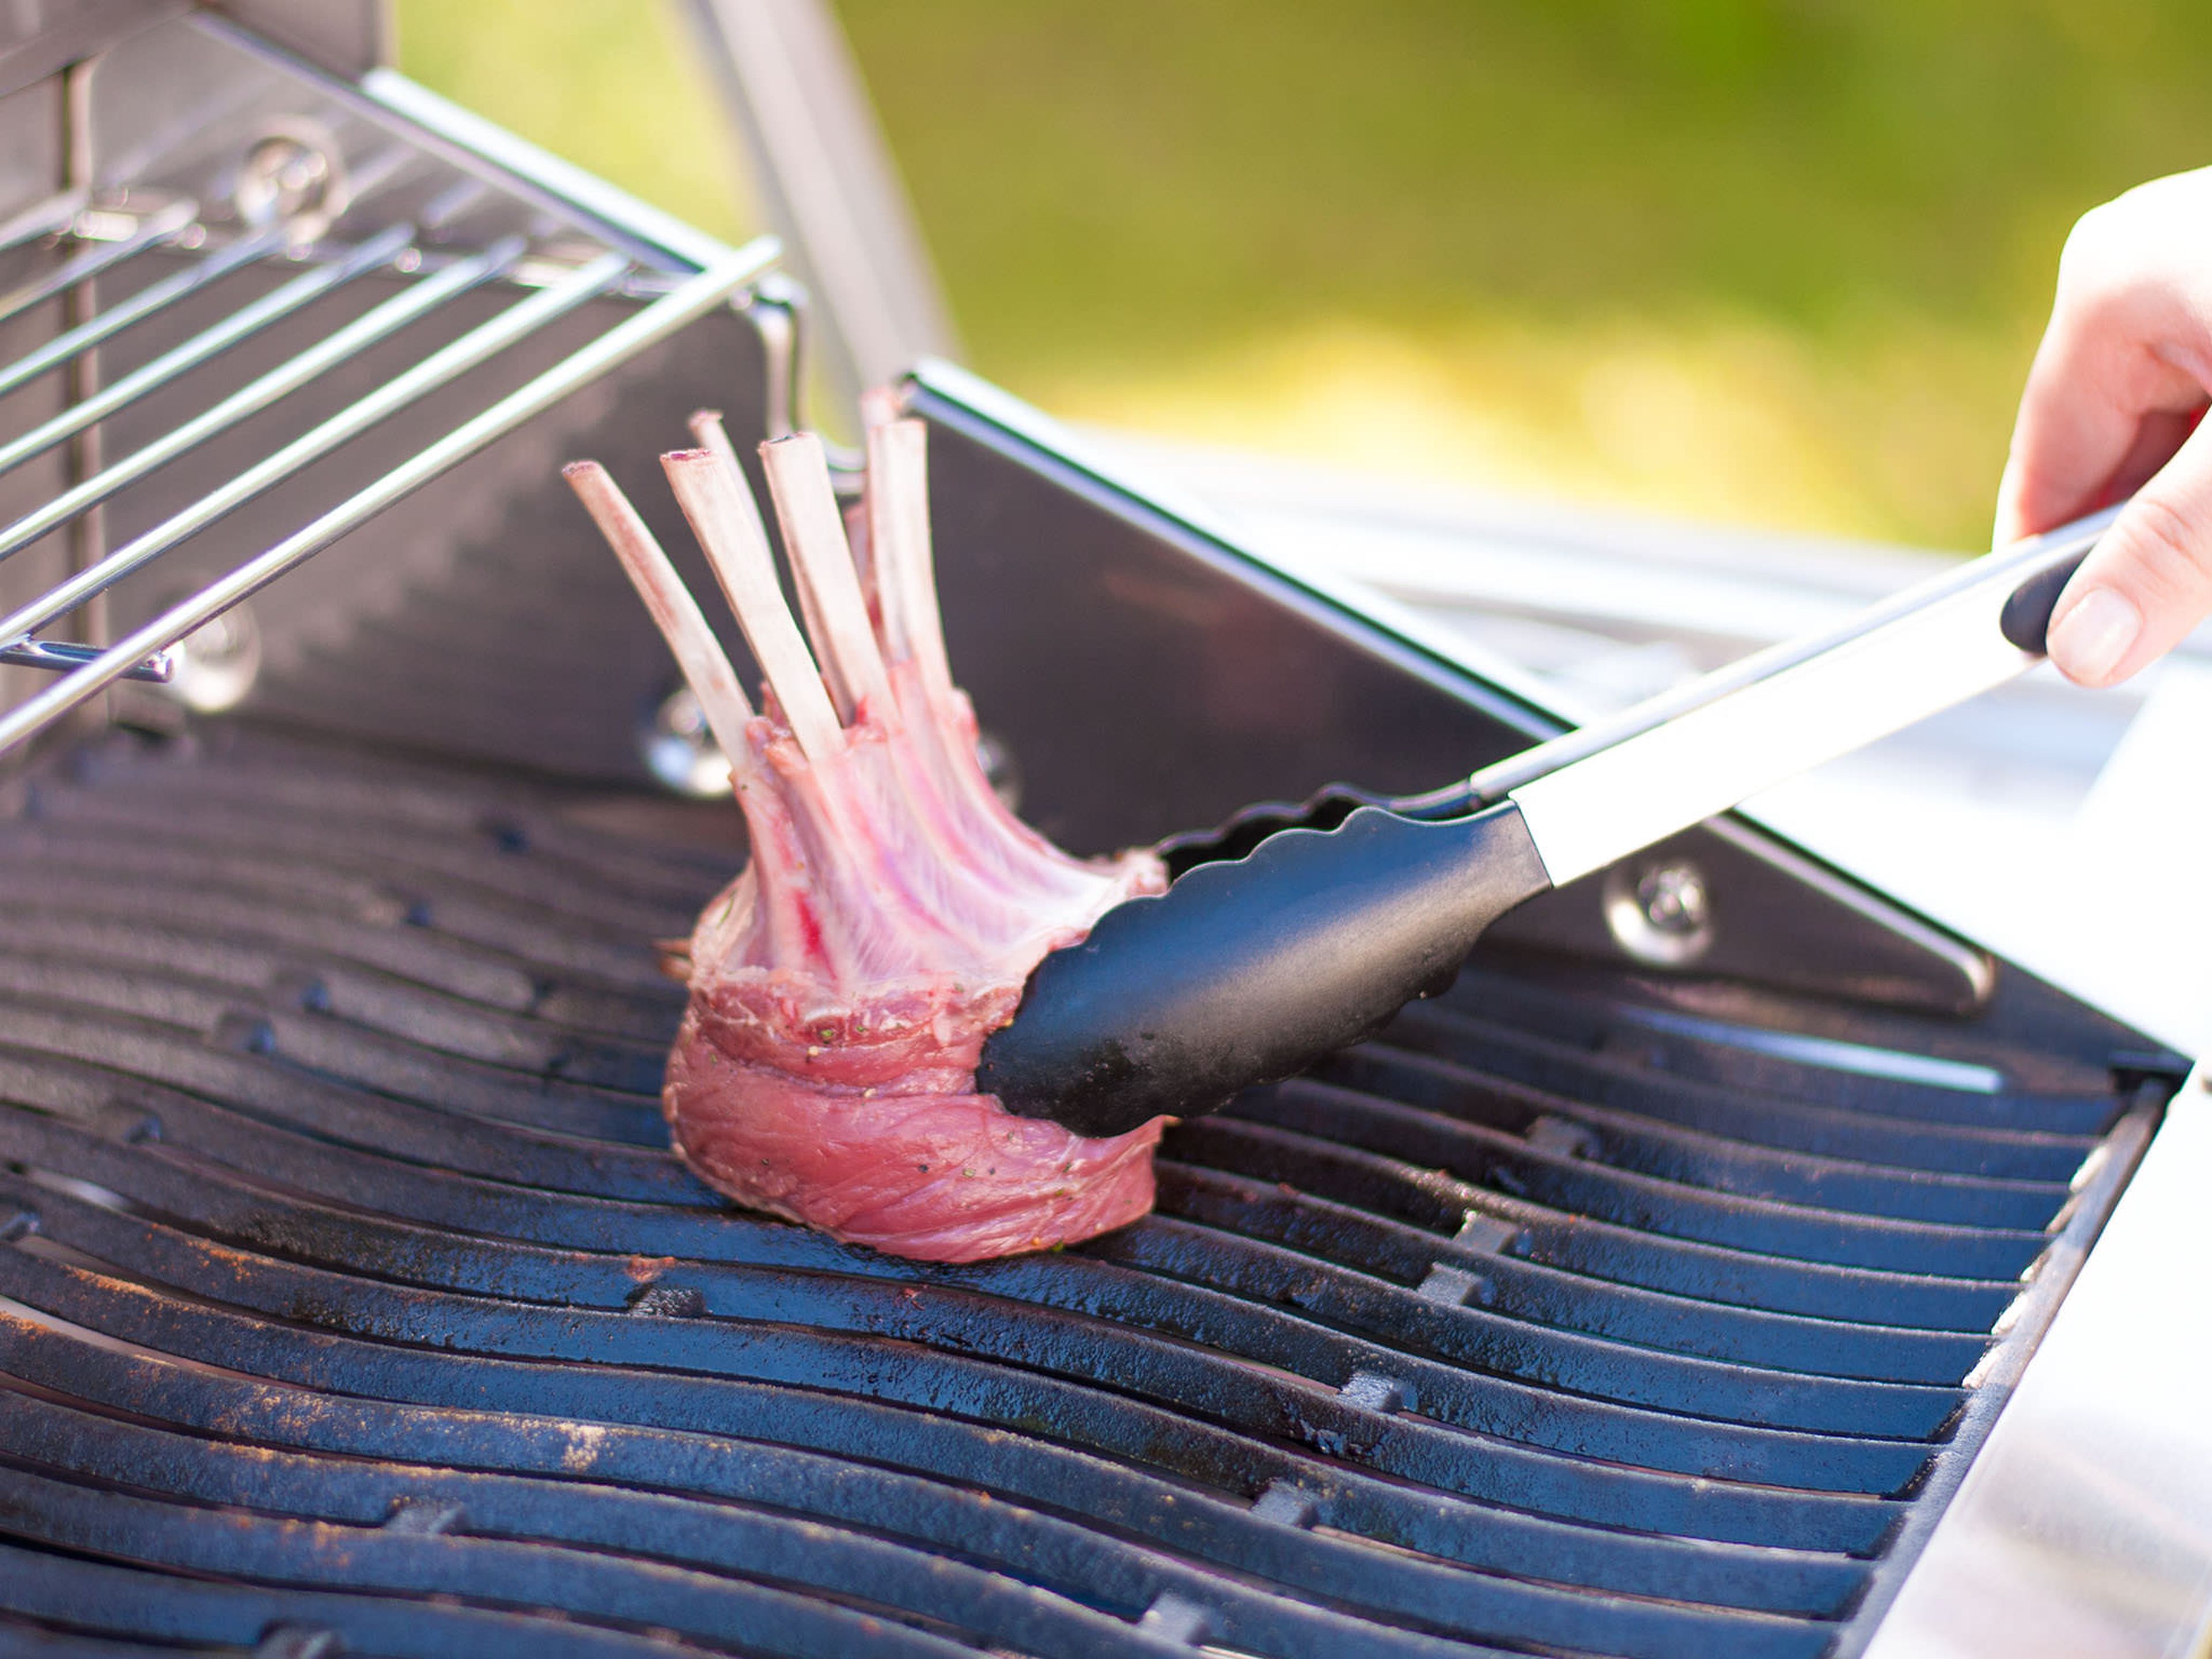 Grill the tied lamb rack for approx. 8 – 10 min. turning occasionally for even browning until it is cooked medium. Leave to rest for at least 5 min. Serve with boiled potatoes or a fresh summer salad.